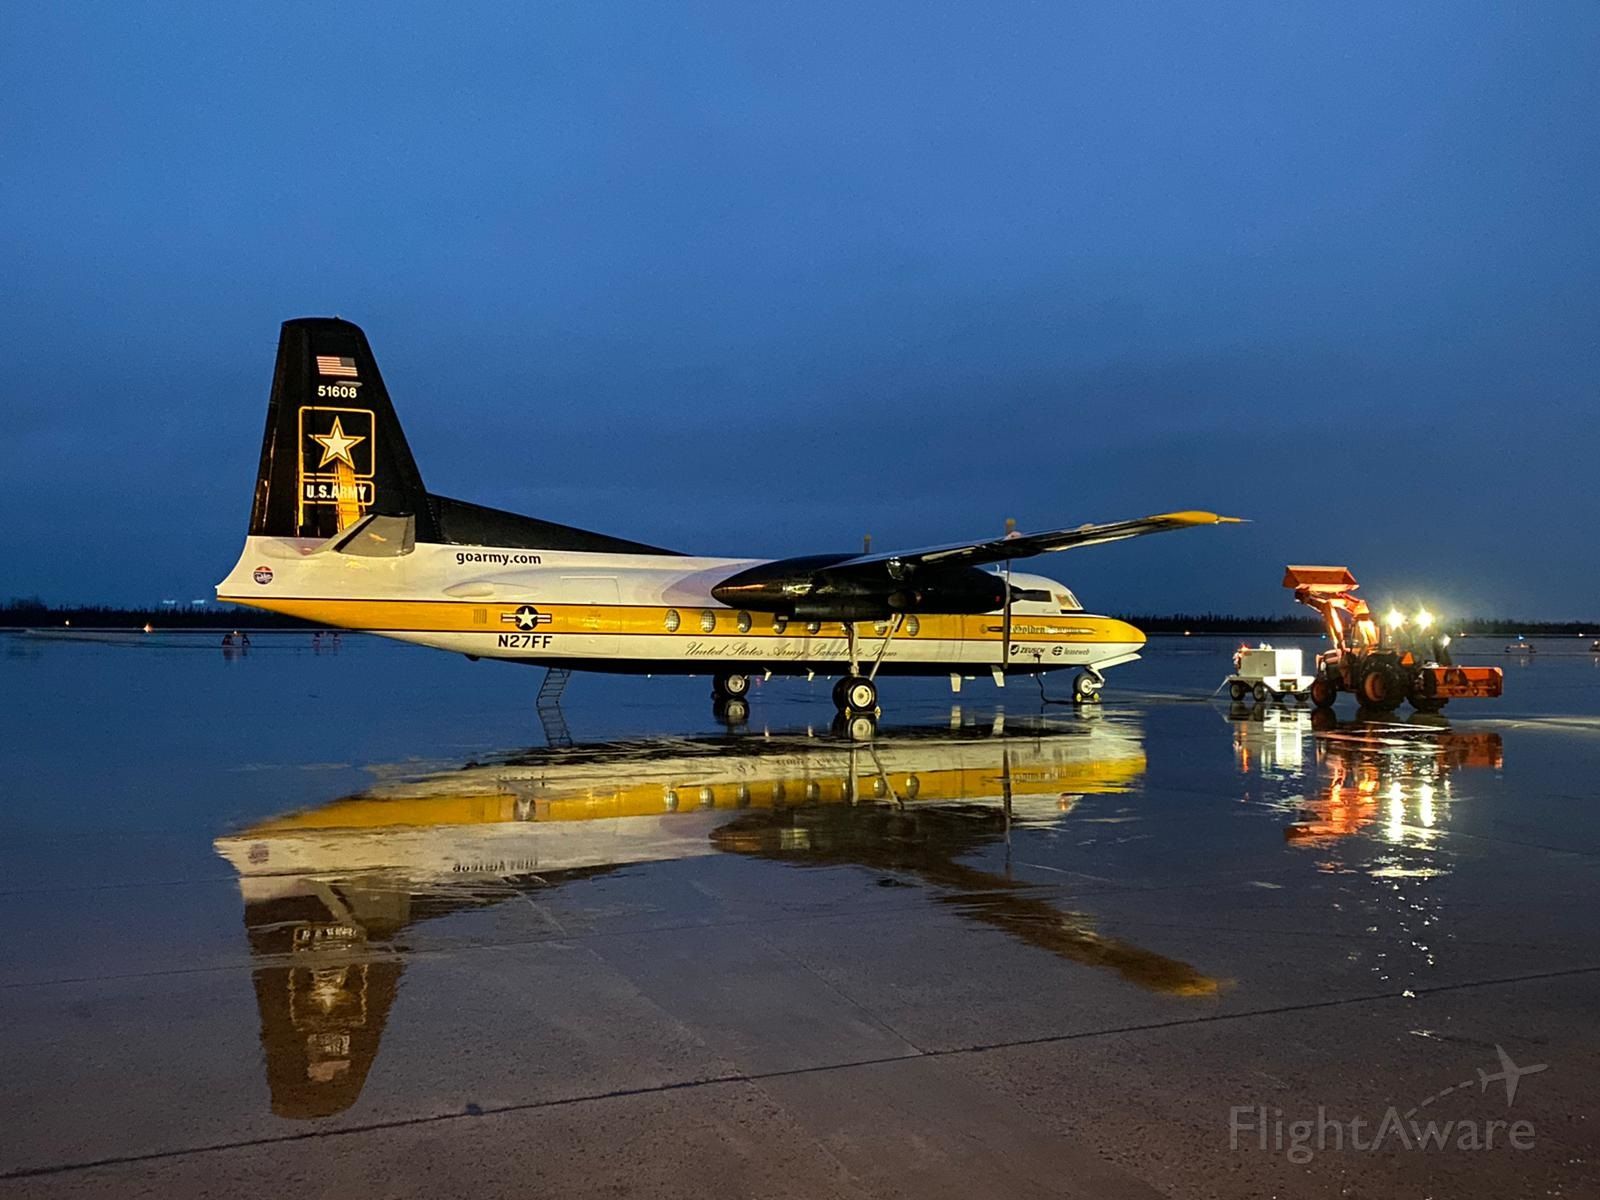 FAIRCHILD HILLER FH-227 (N27FF) - Ferry flight to The Netherlands, "back home"after 35 years service at Golden Knights.